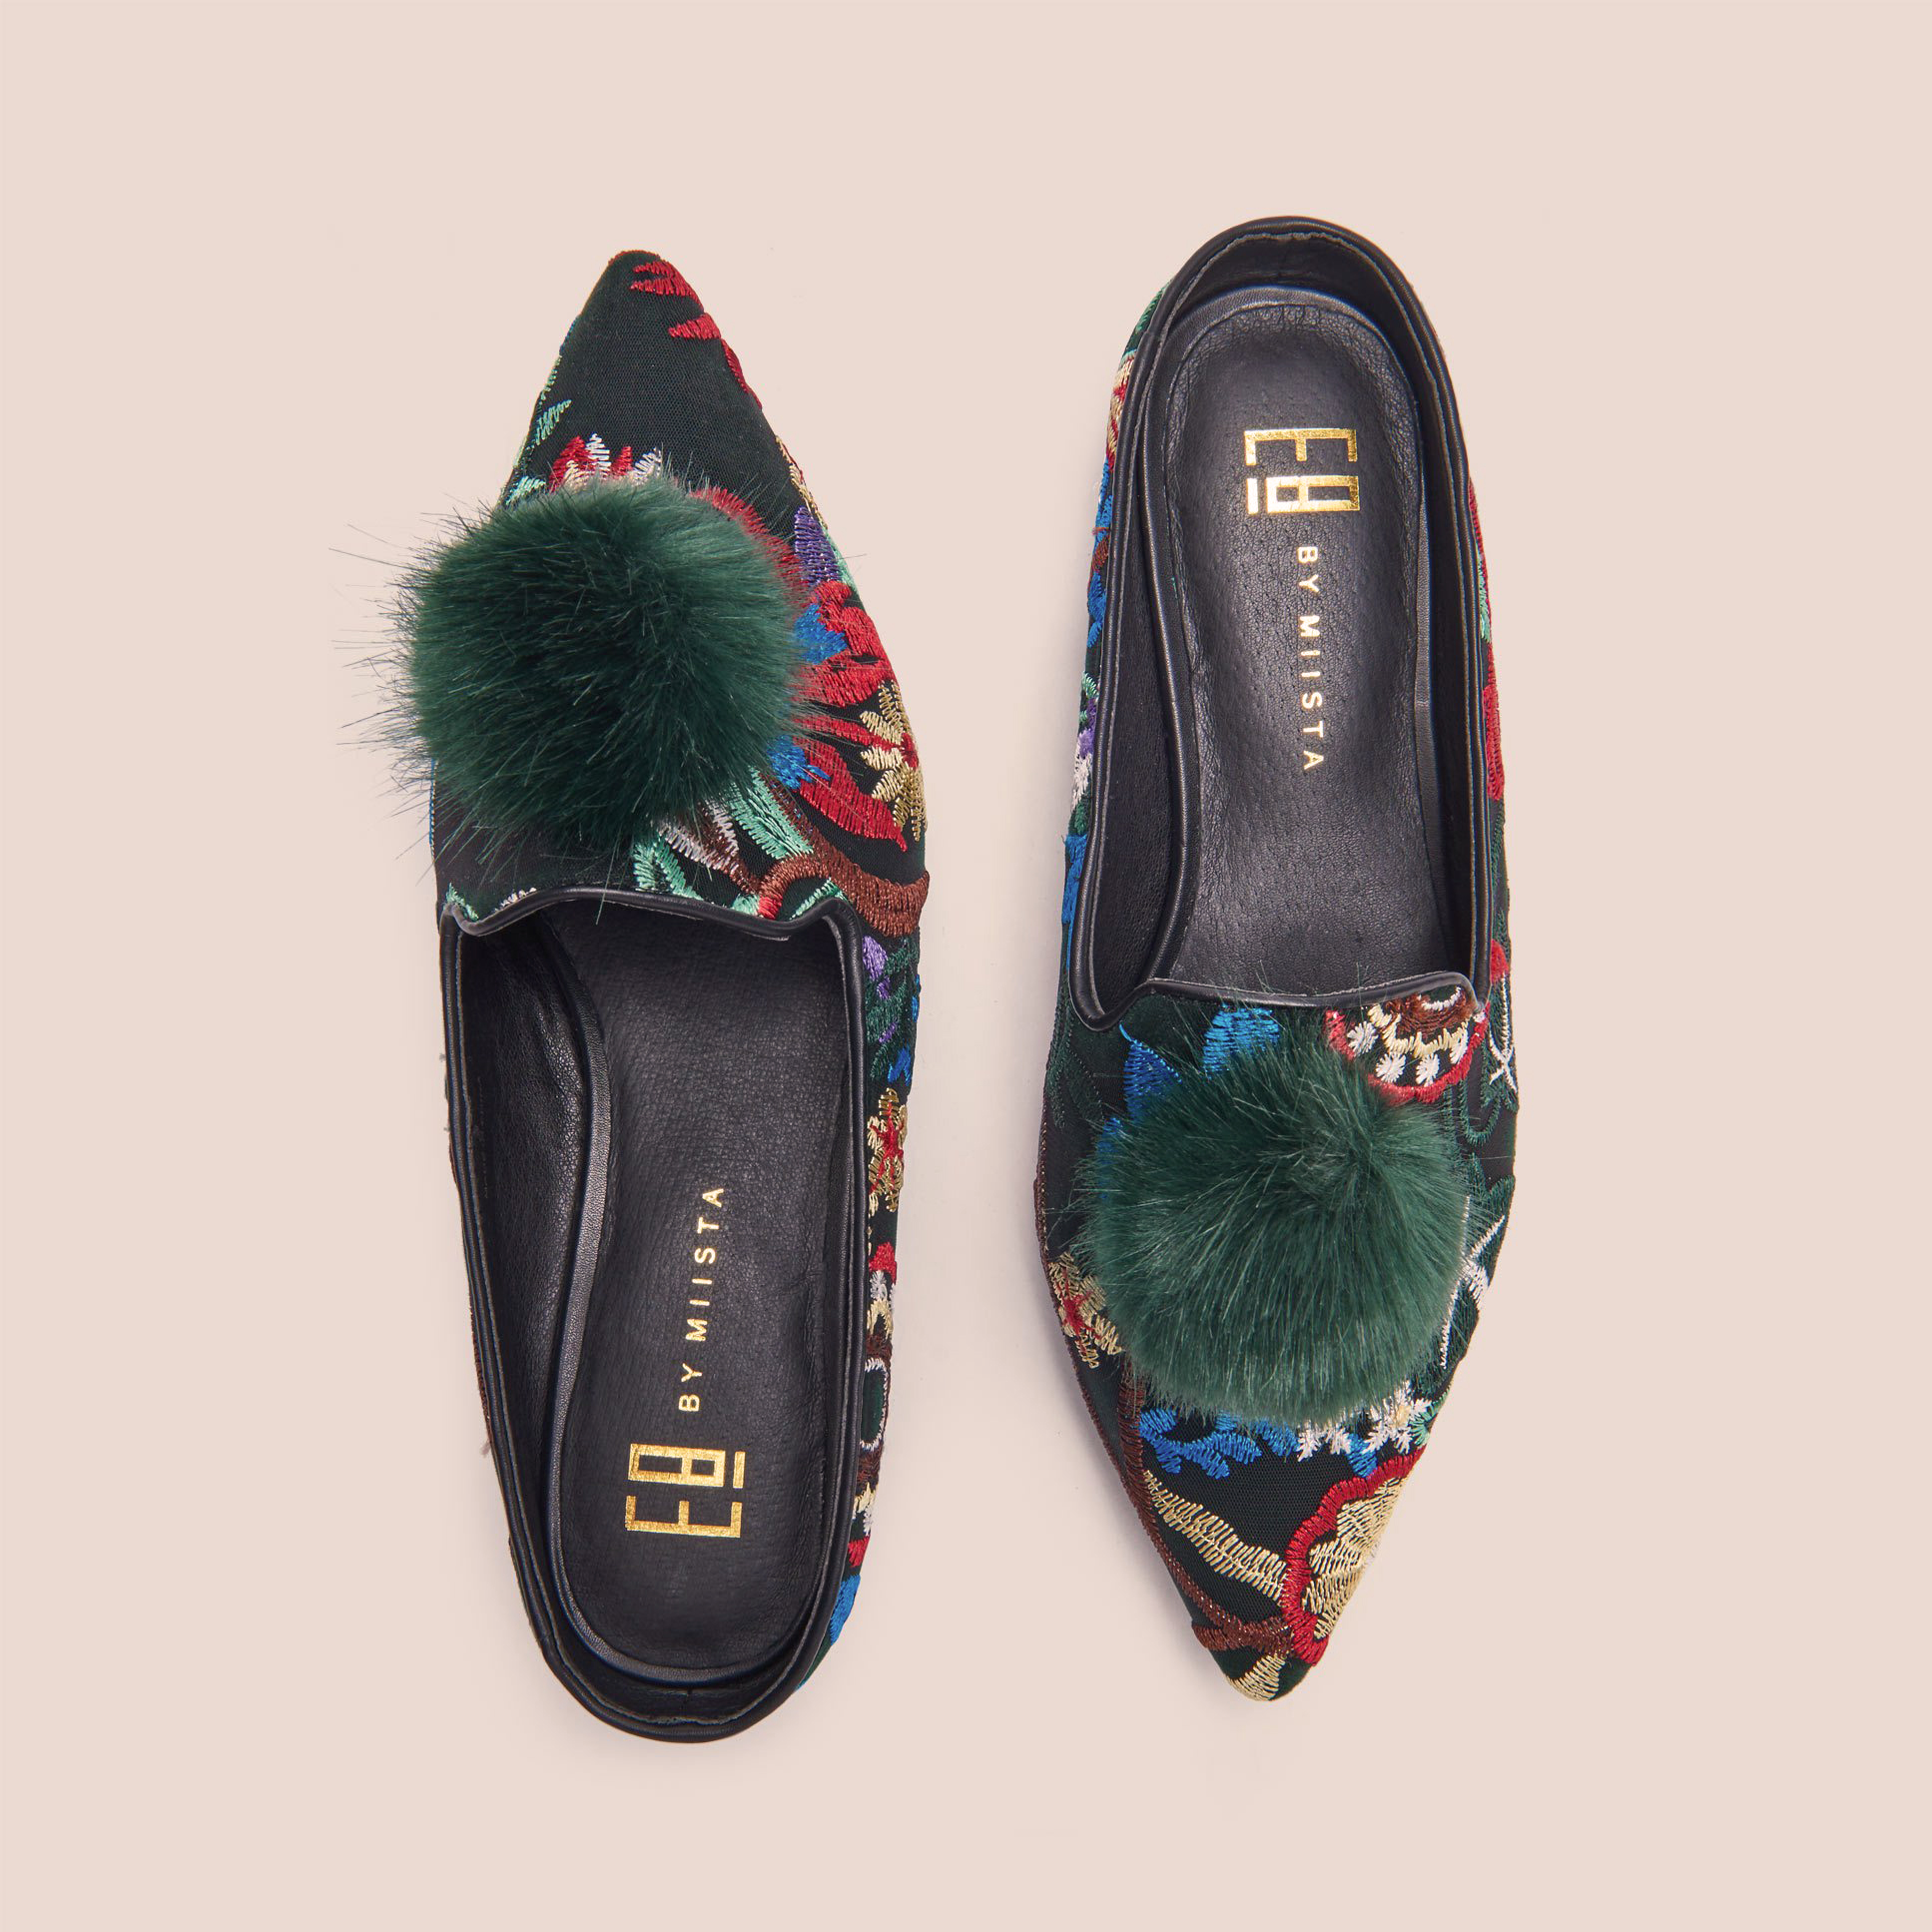 Poppy Green Embroidered Flats by E8 by Miista